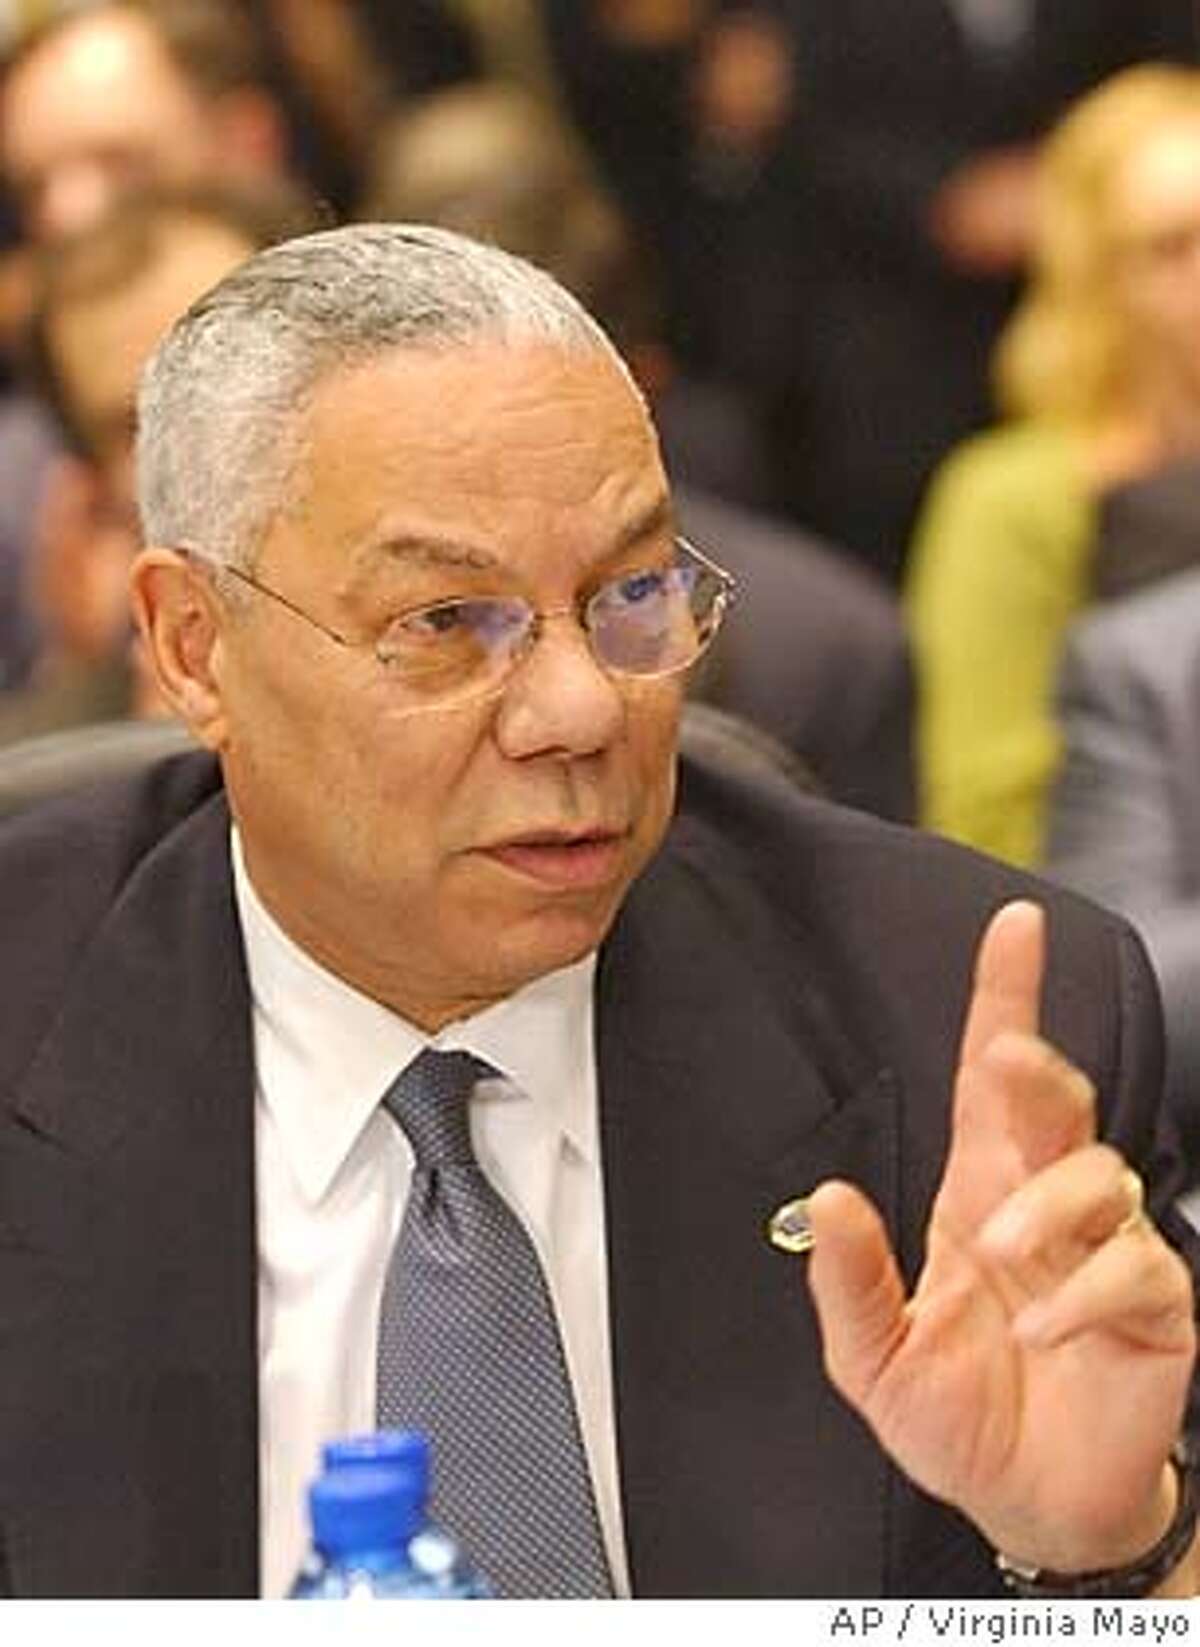 U.S. Secretary of State Colin Powell gestures during a meeting of the Organization of Security and Cooperation in Europe (OSCE) at the Palace of Culture in Sofia, Bulgaria, Tuesday Dec. 7, 2004. Powell rejected on Tuesday Russian charges the West is engaging in political manipulation to expand its influence in Ukraine and other former Soviet republics. (AP Photo/Virginia Mayo)